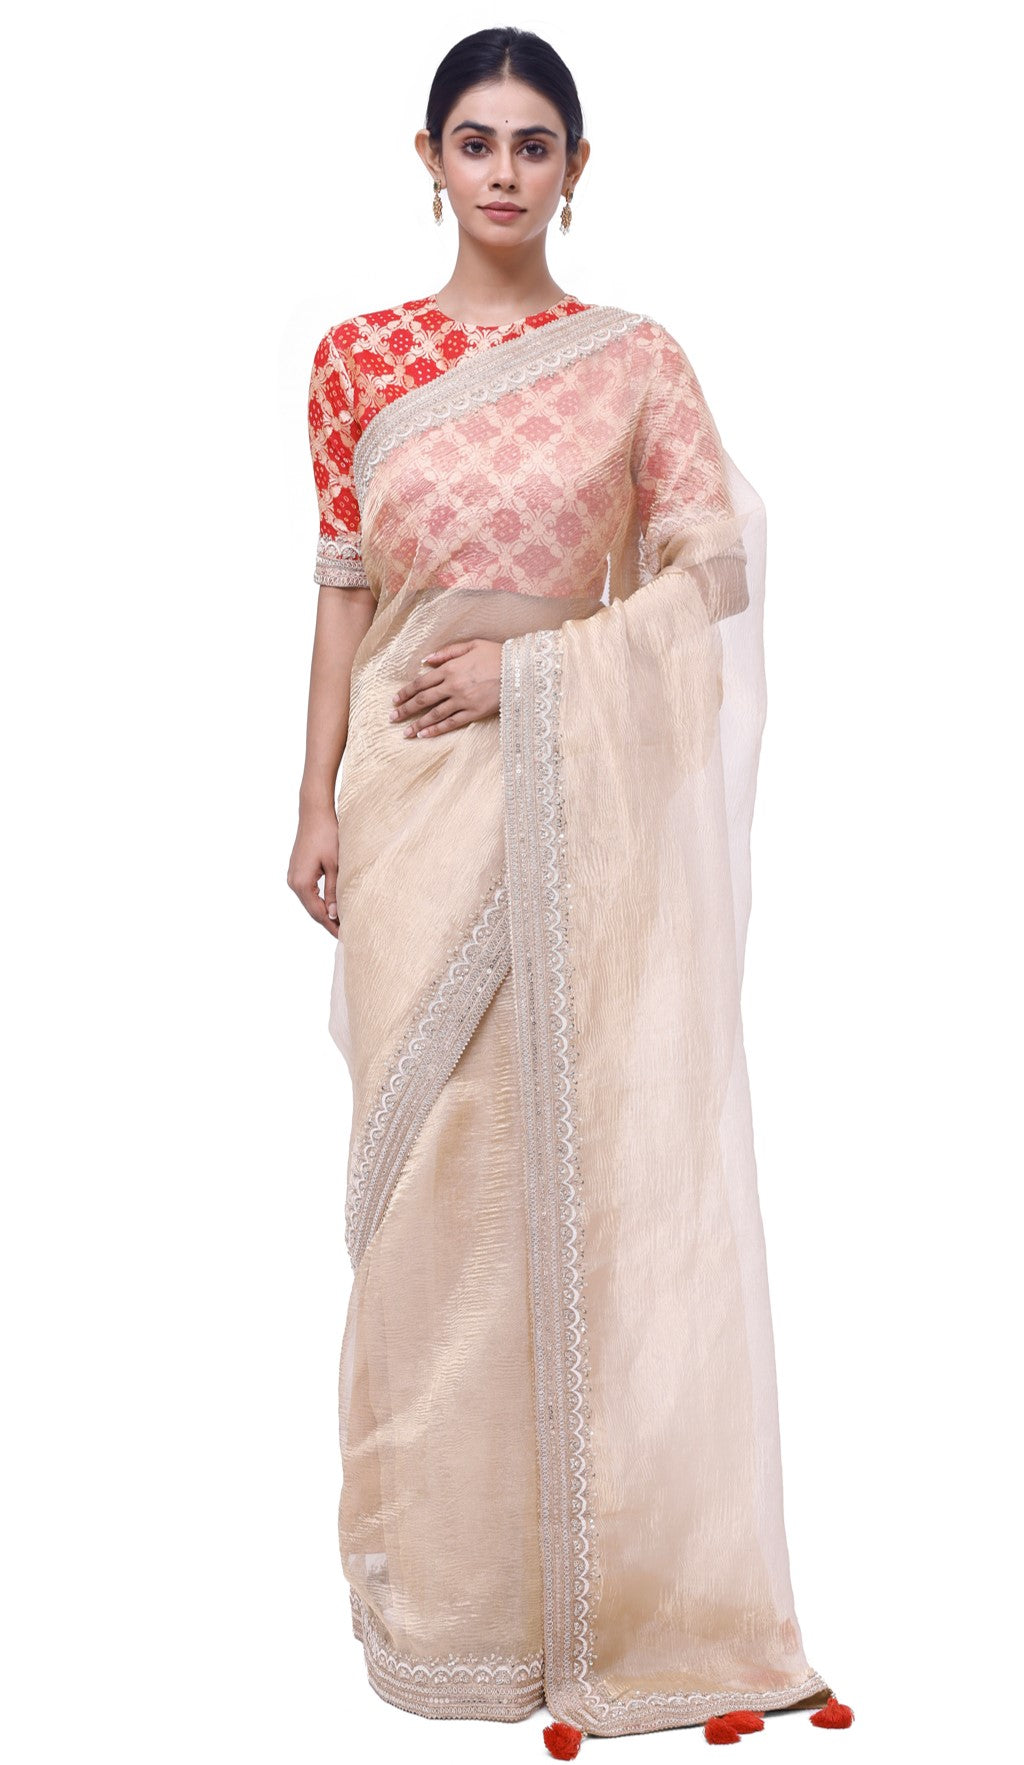 Buy gold embroidered tissue saree online in USA with red bandhej saree blouse. Look your best at parties and weddings in beautiful designer sarees, embroidered sarees, handwoven sarees, silk sarees, organza saris from Pure Elegance Indian saree store in USA.-full view